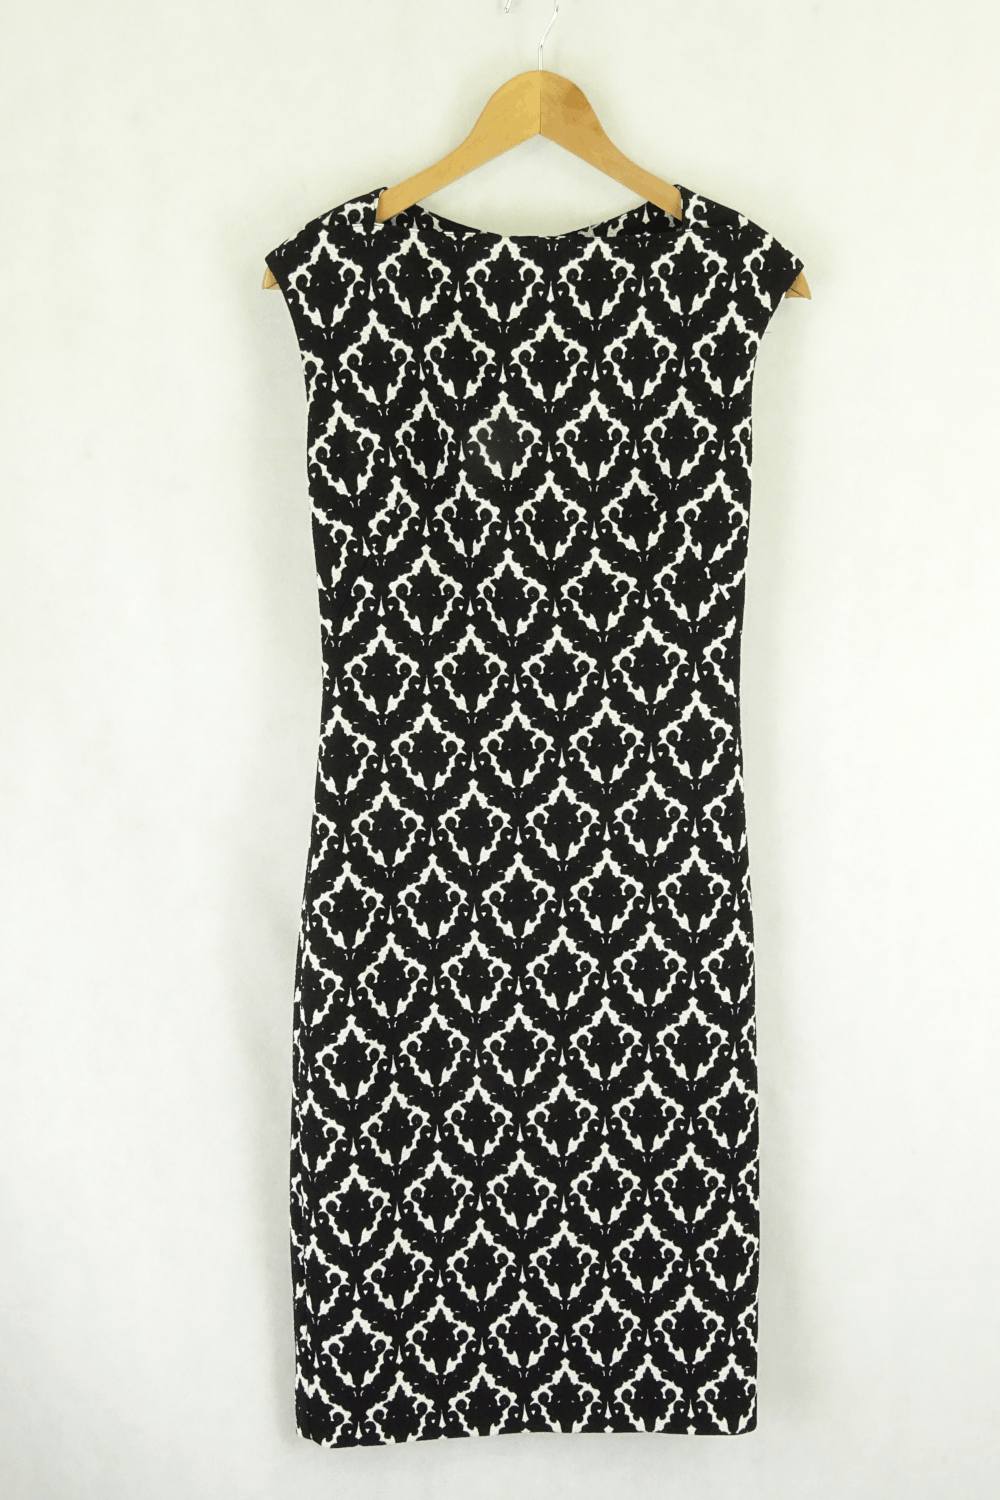 Atmos And Here Black And White Print Dress 8